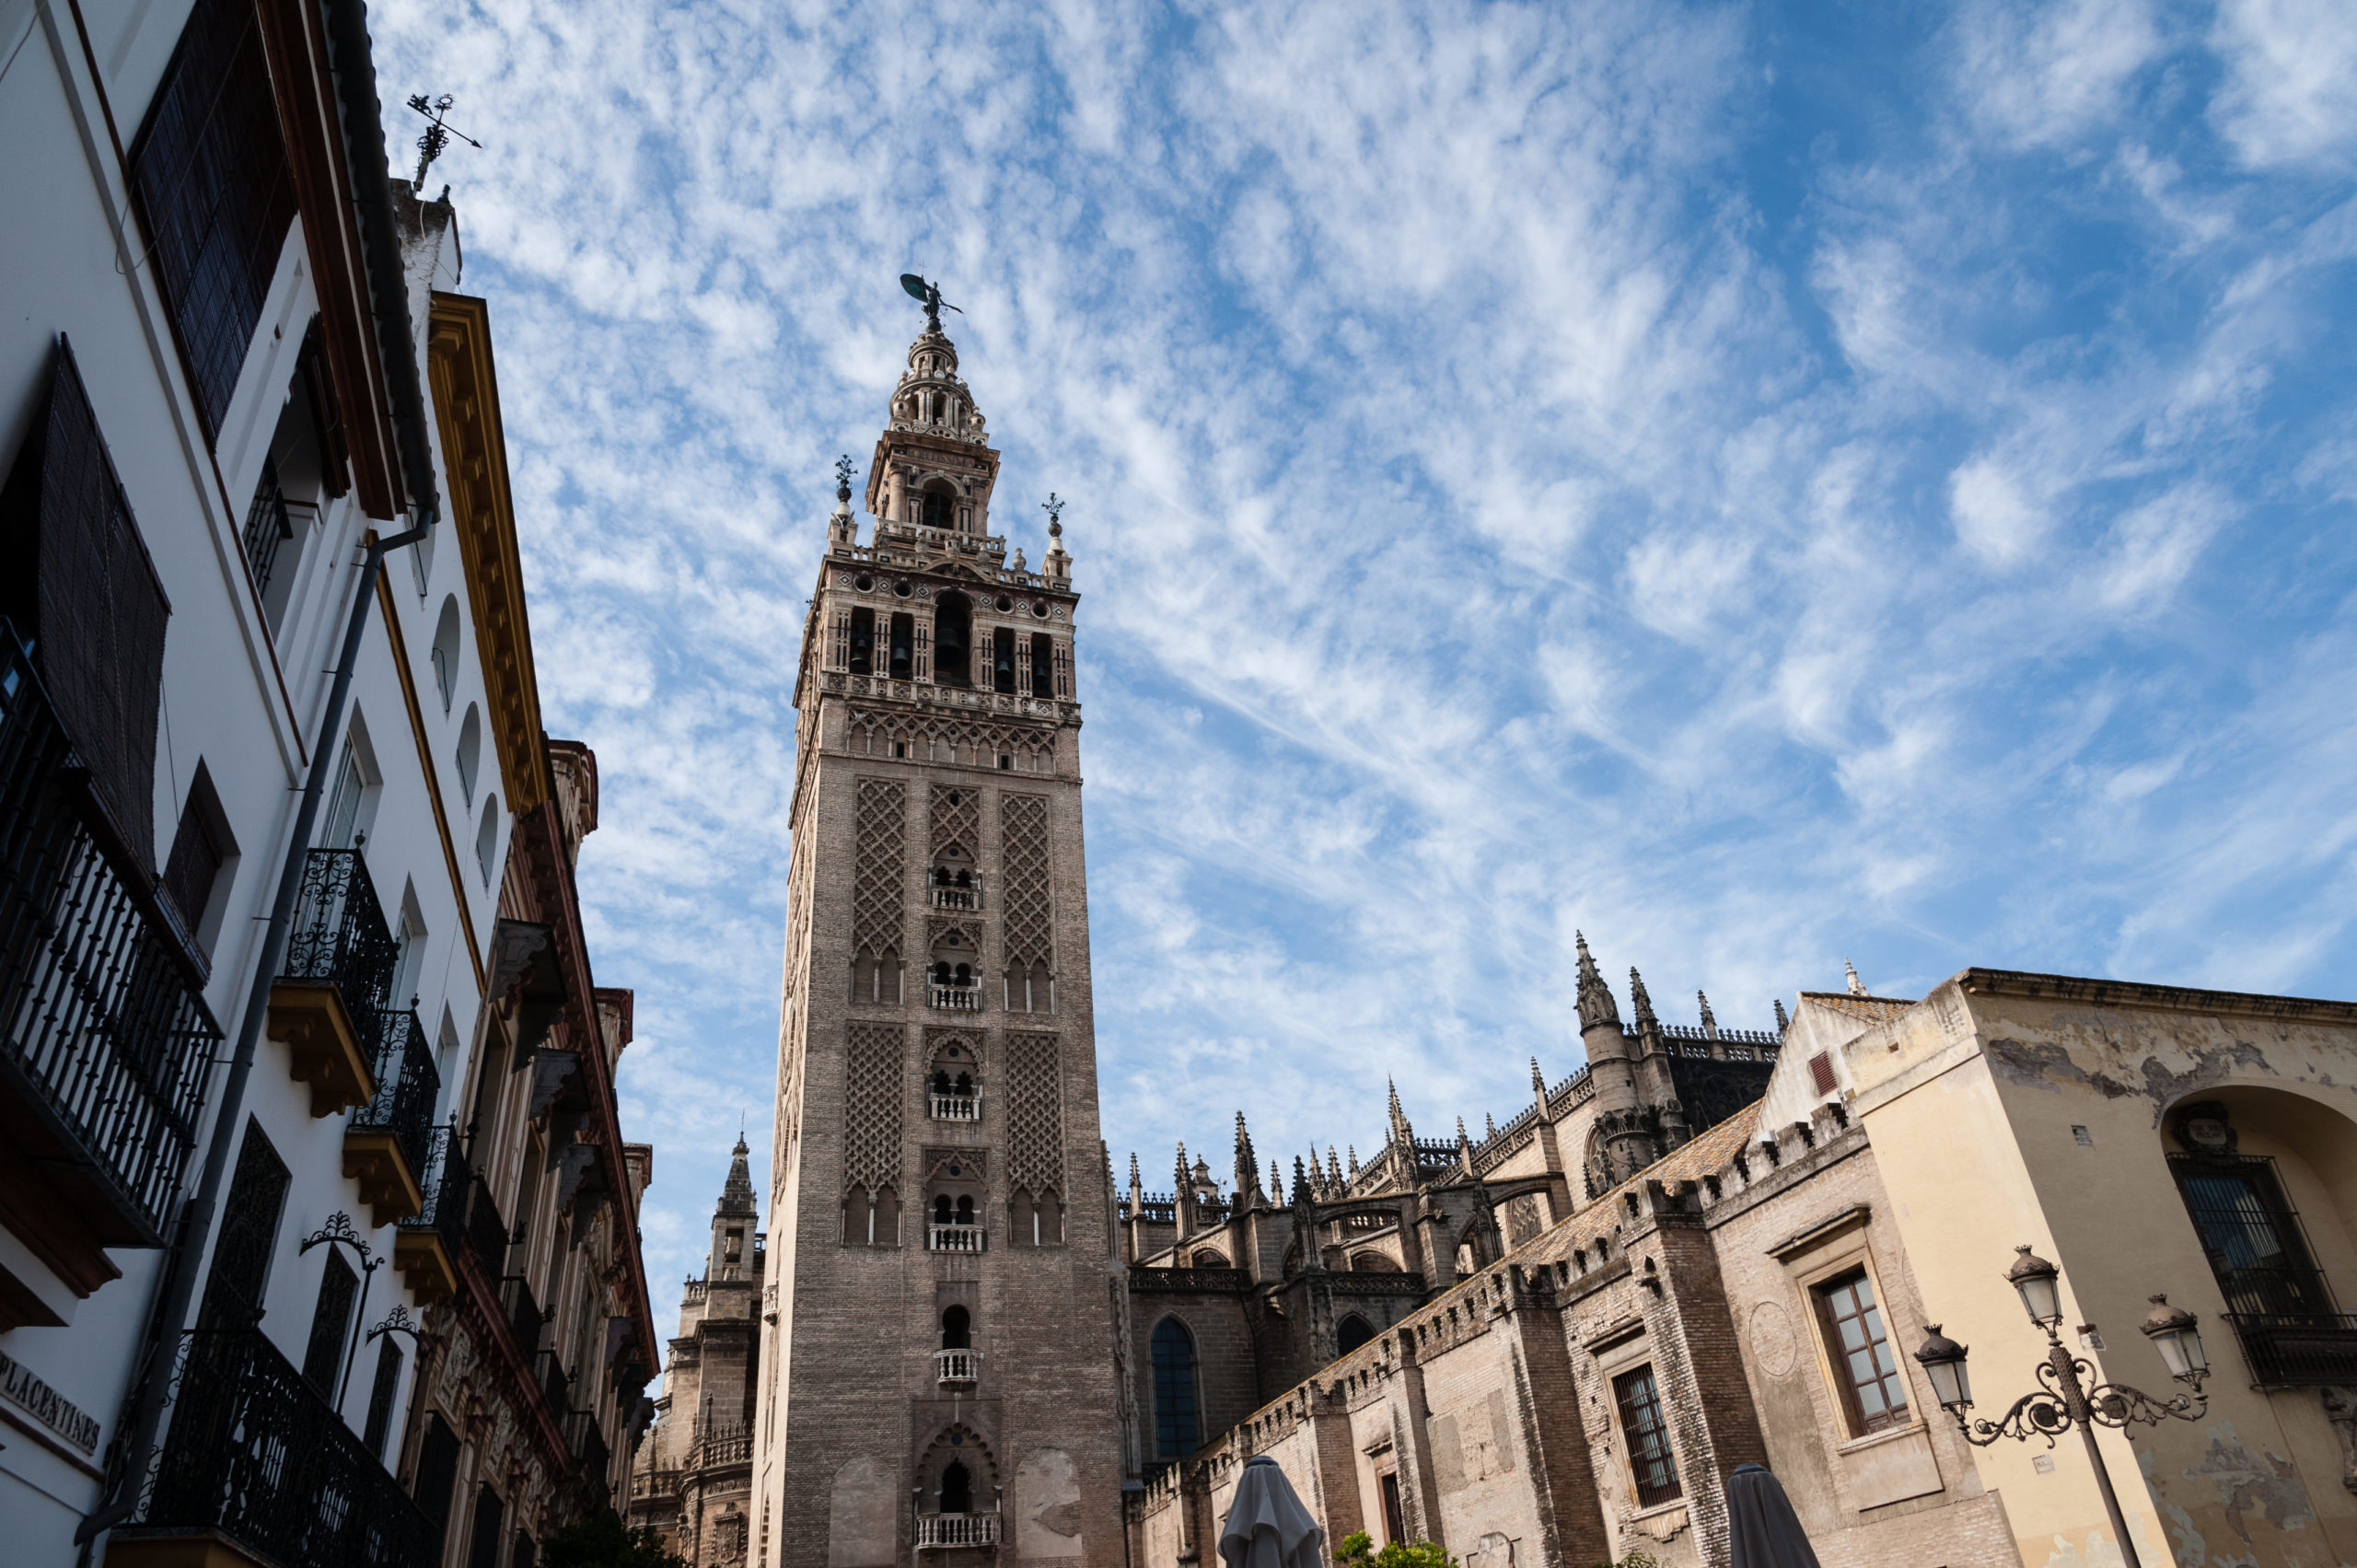 An iconic building of Seville